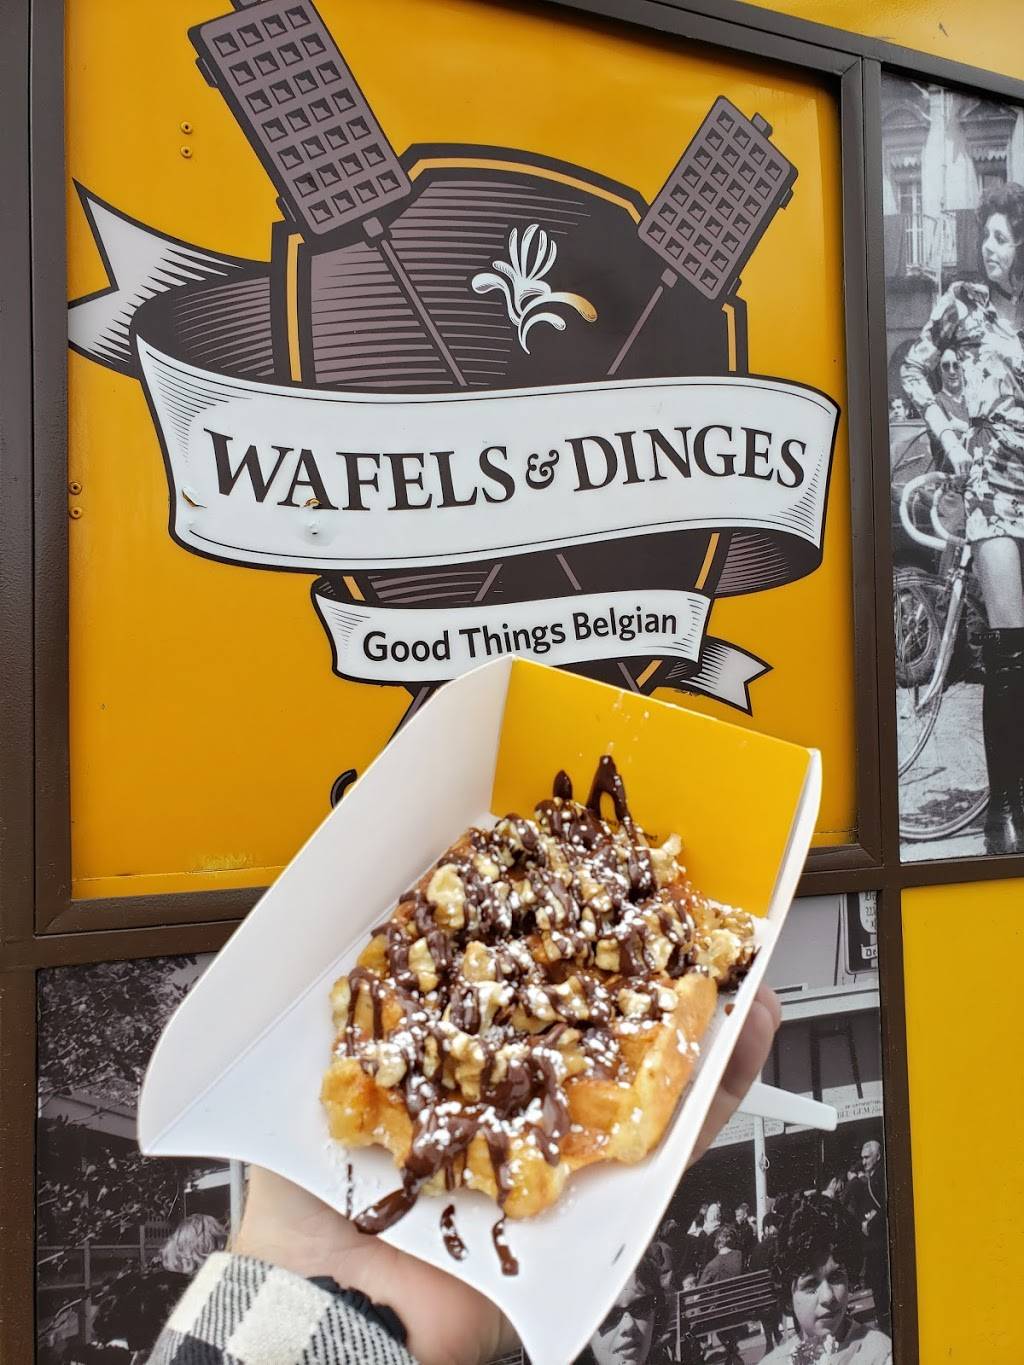 Wafels & Dinges | cafe | Central Park - Center Drive near Wollman Rink, New York, NY 10019, USA | 6462572592 OR +1 646-257-2592